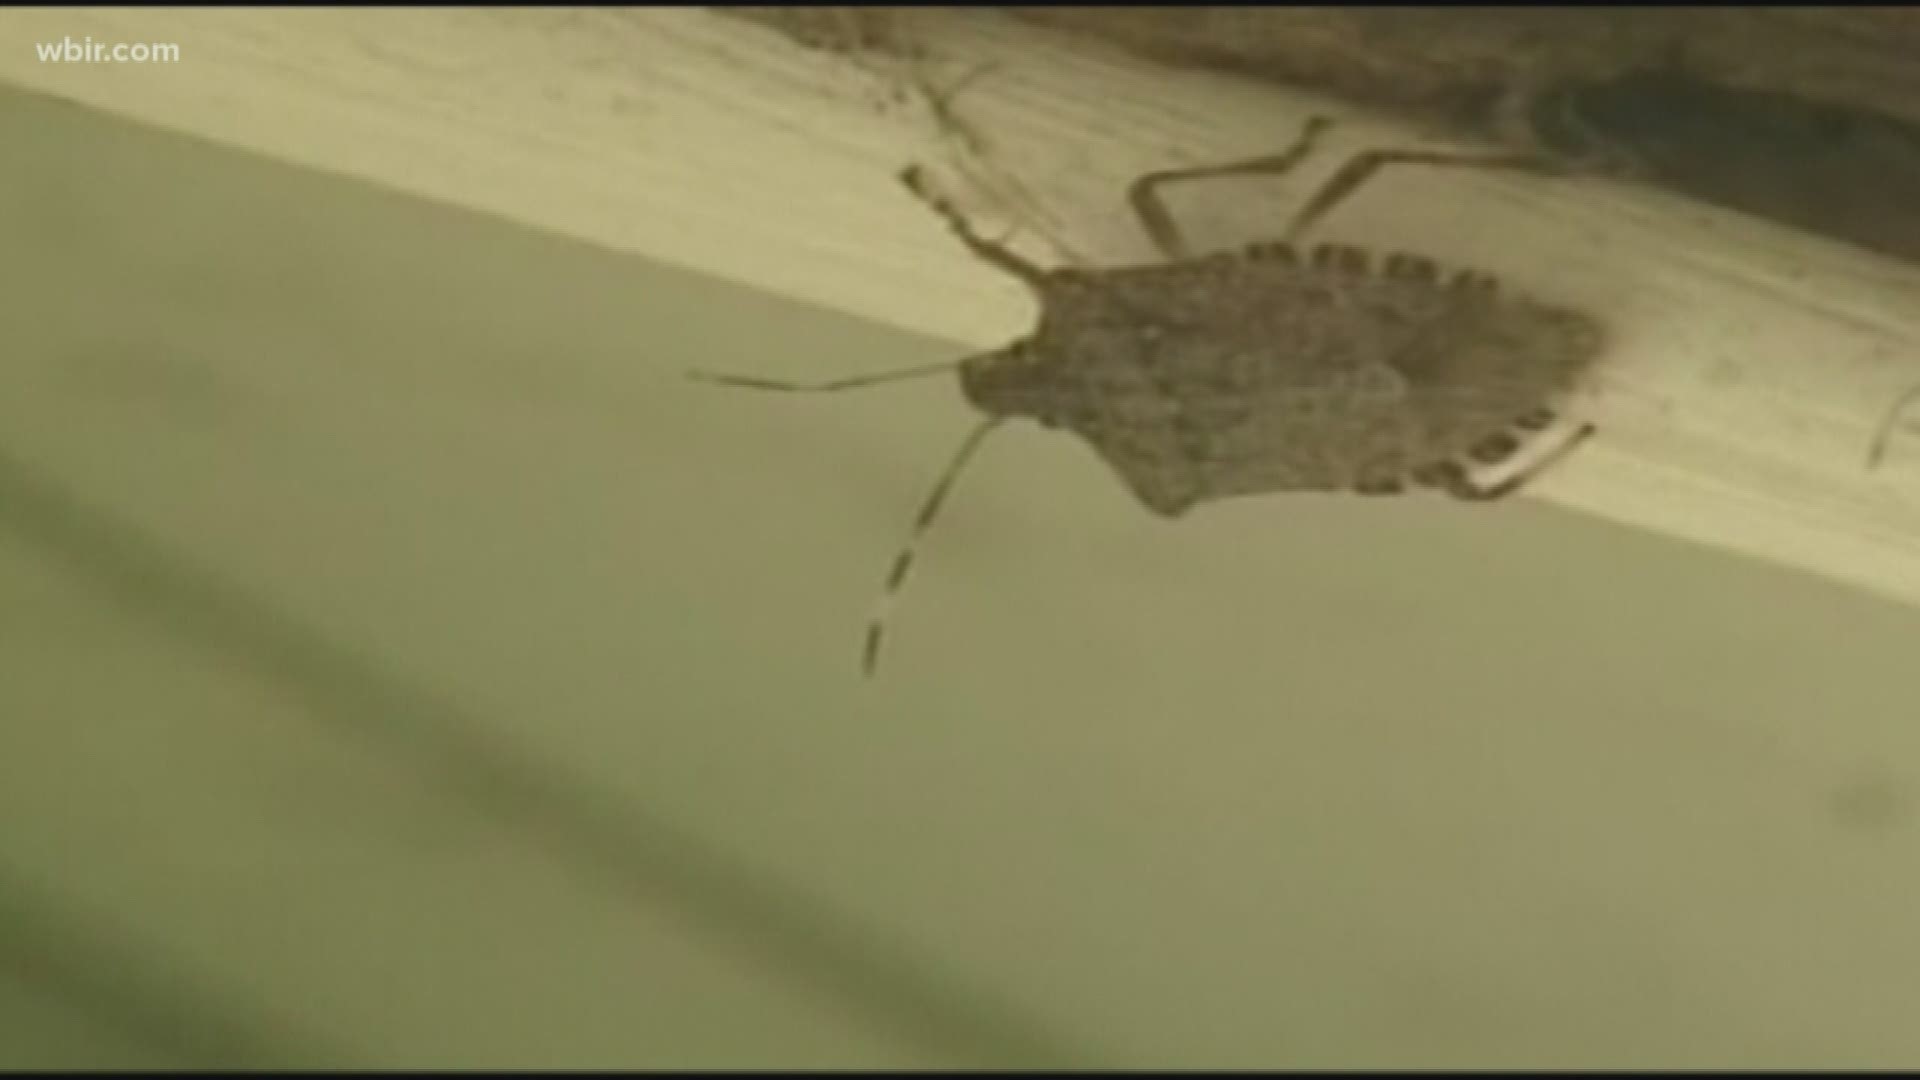 Fall is one of the times of year stink bugs like to sneak into people's homes.